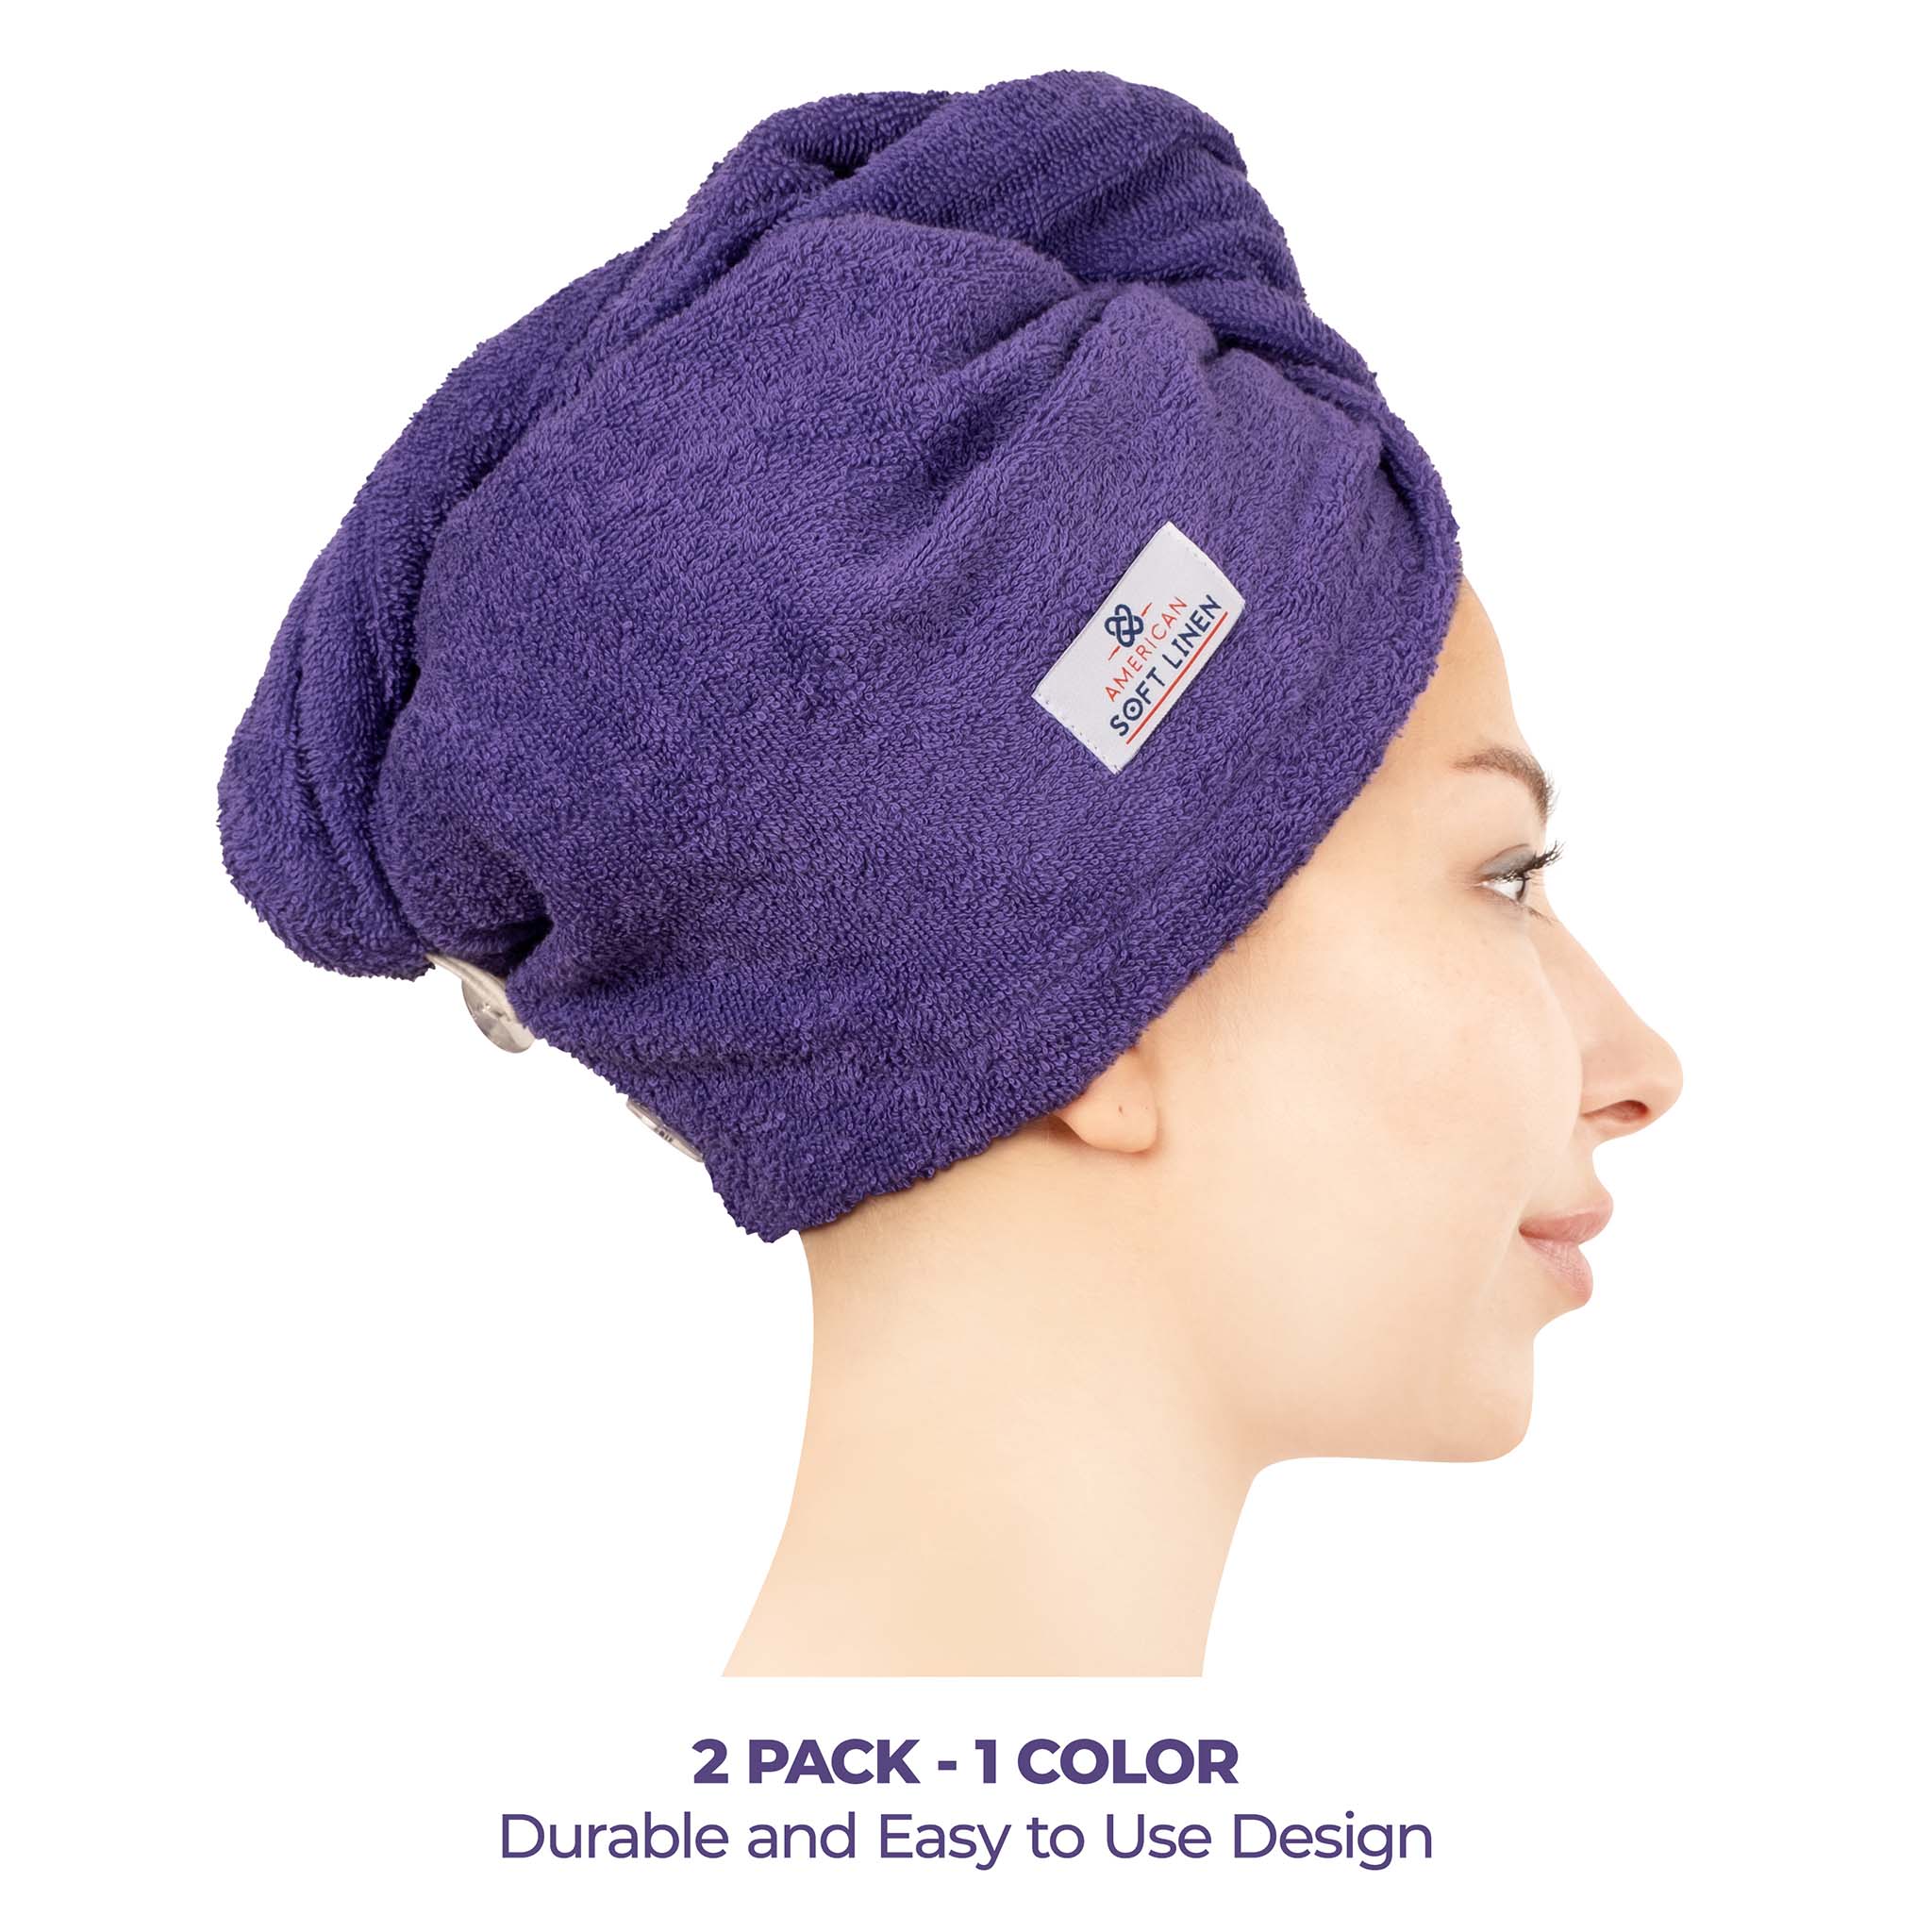 American Soft Linen 100% Cotton Hair Drying Towels for Women 2 pack 75 set case pack purple-2